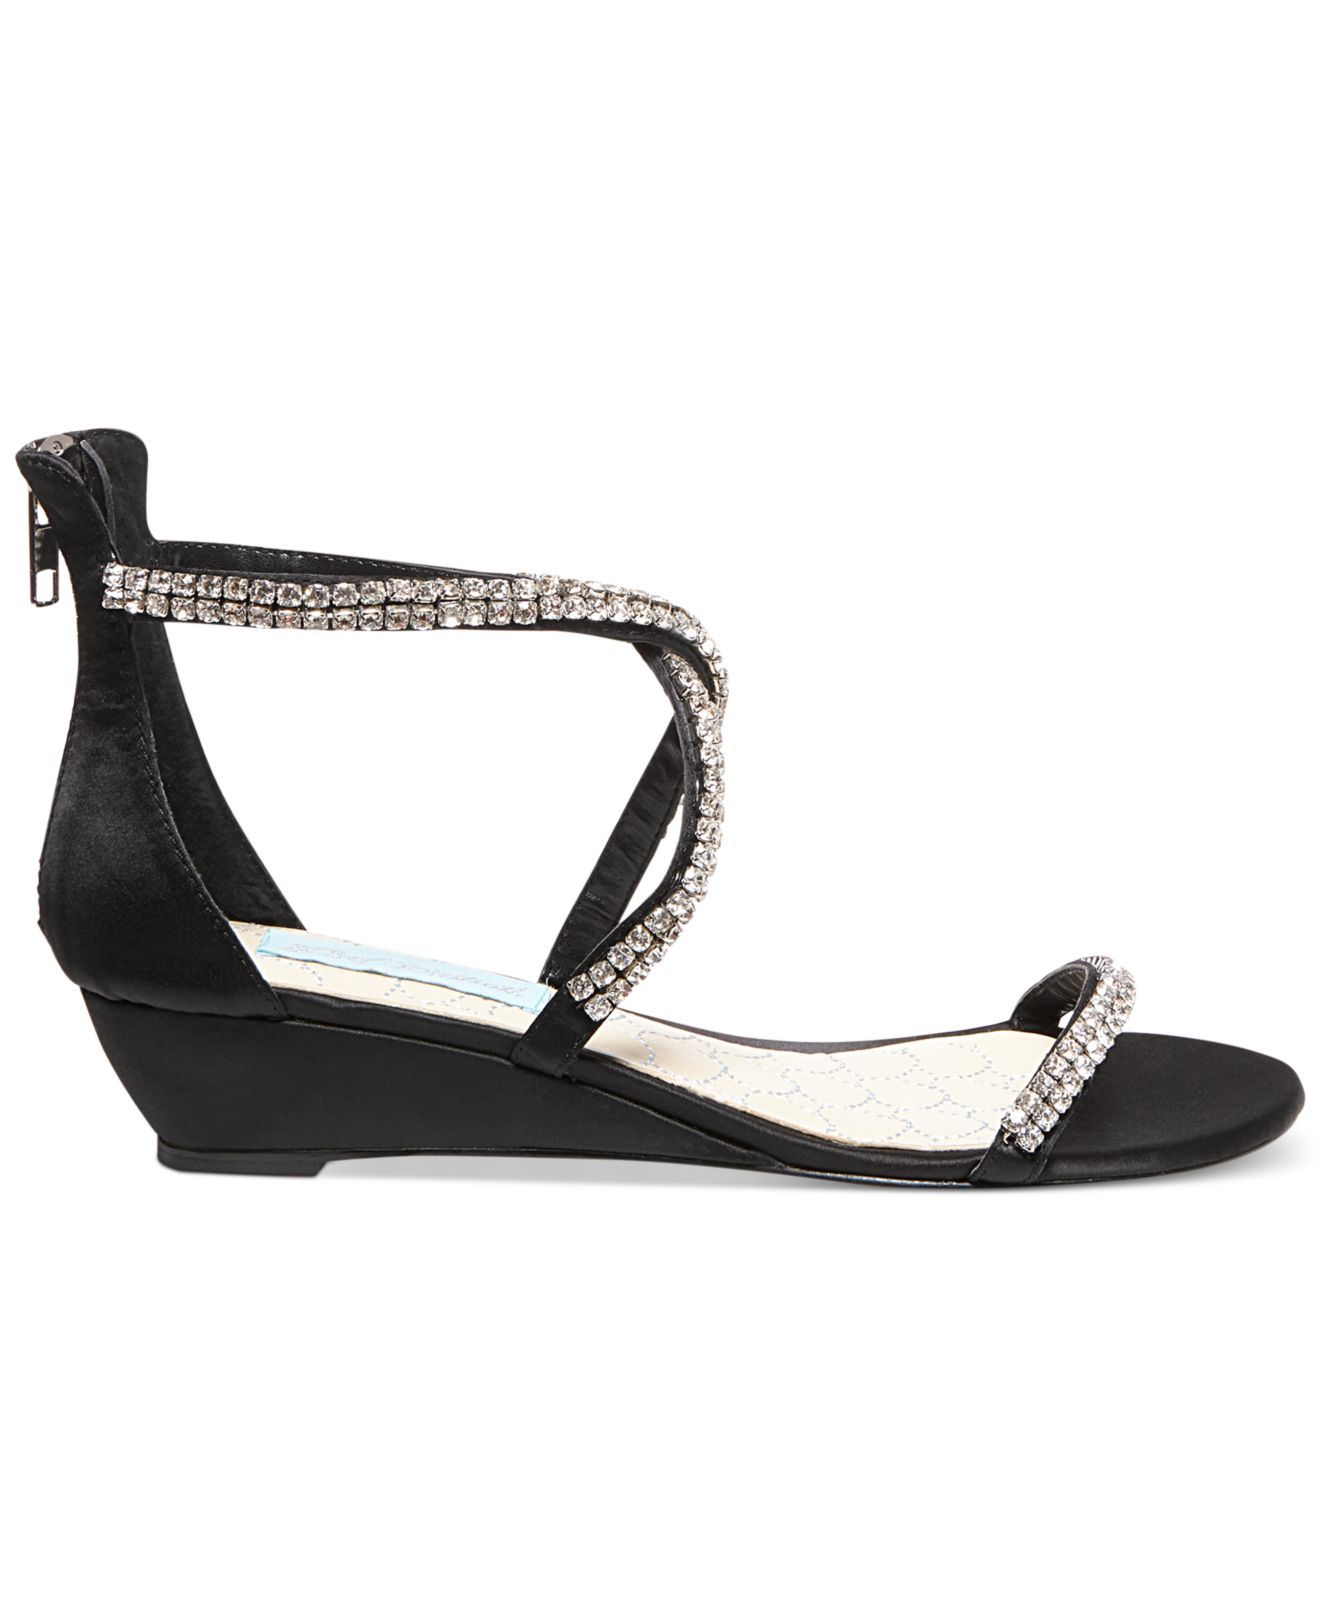 black wedge evening shoes